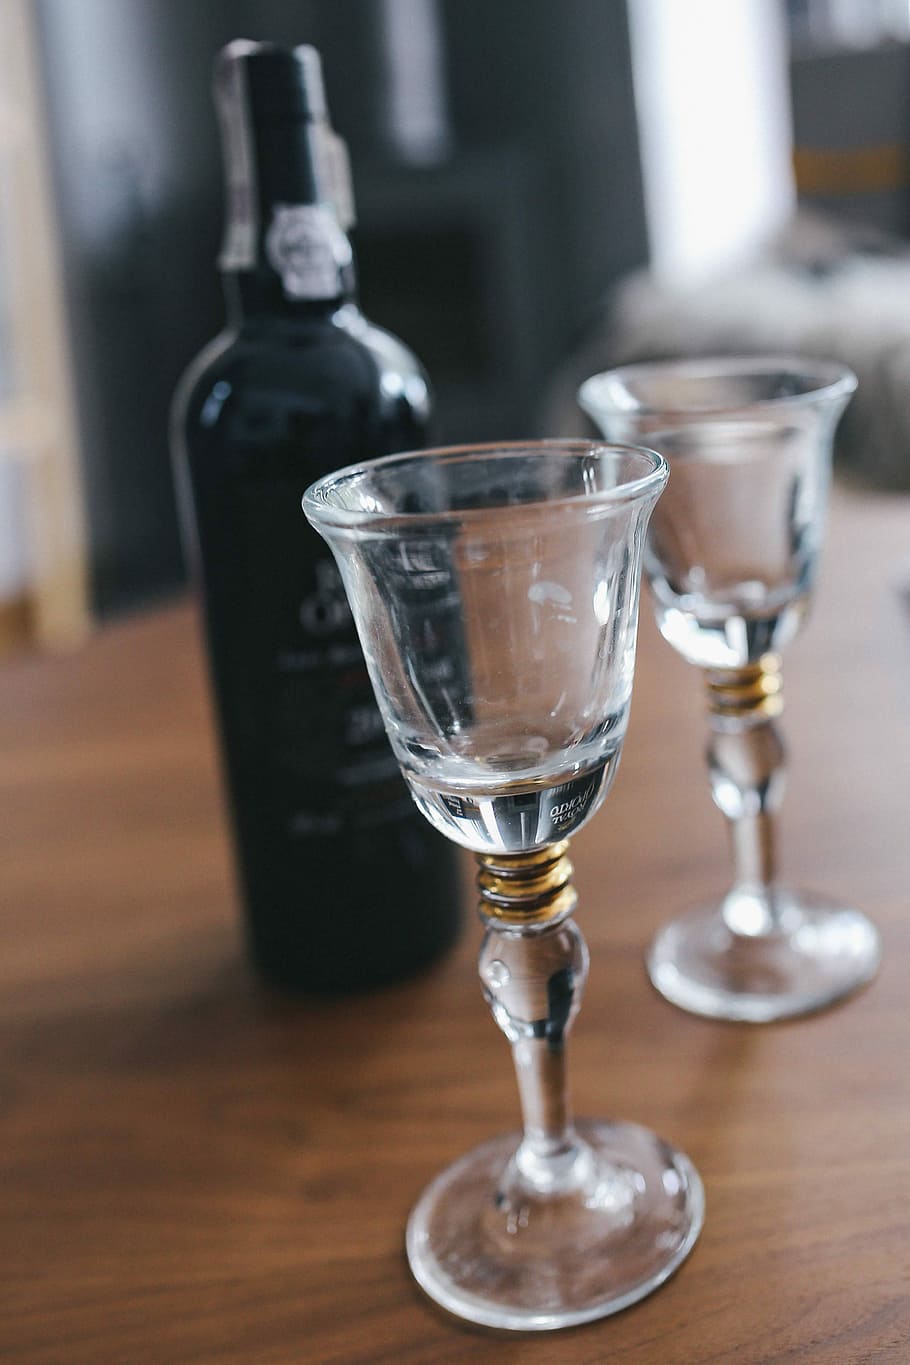 Two empty wine glasses with a bottle of wine on a table, alcohol